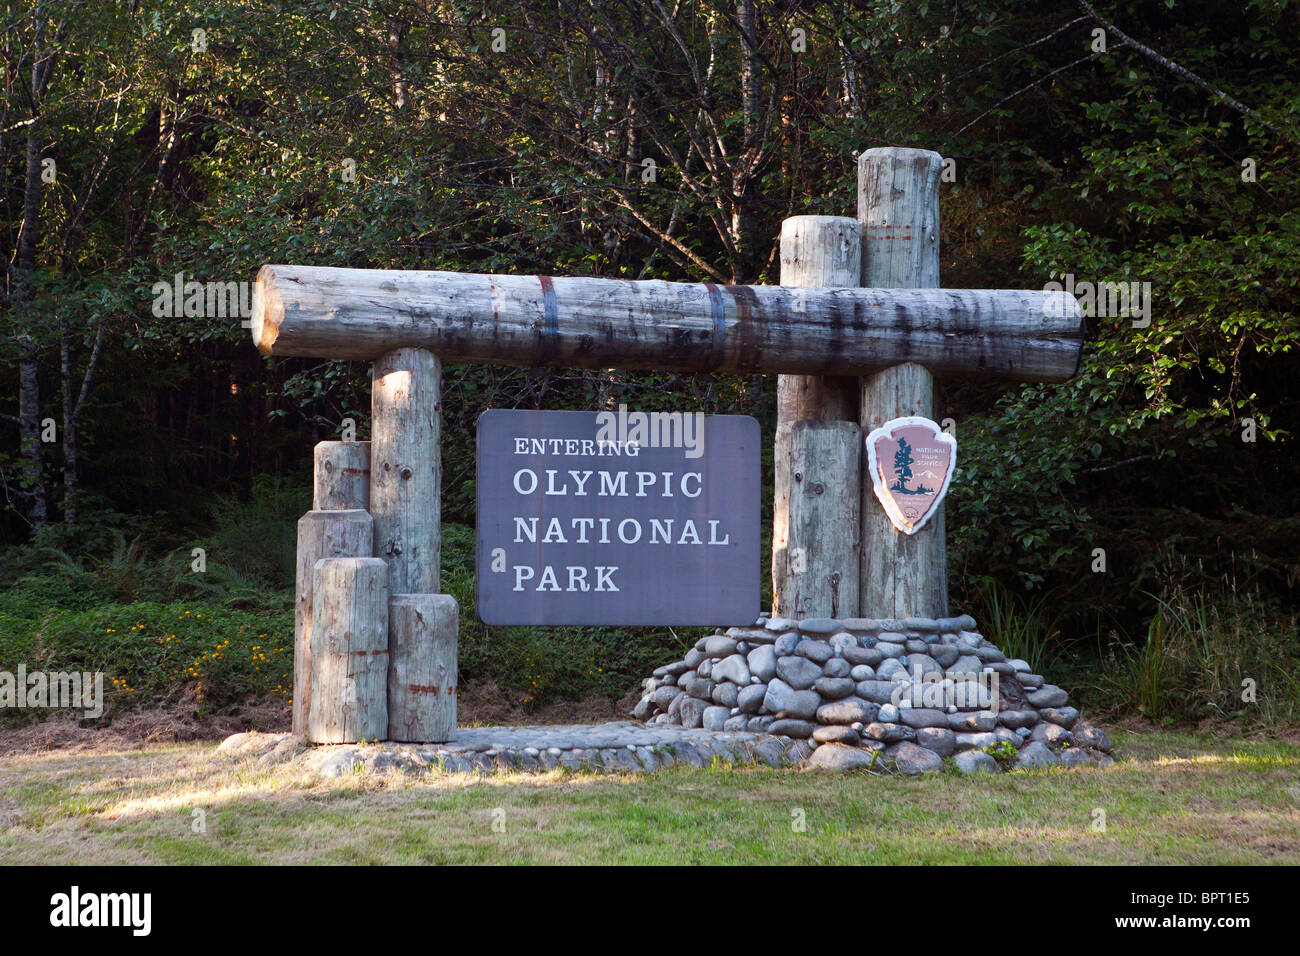 National Park Service welcome sign, Olympic National Park, Washington, United States of America Banque D'Images